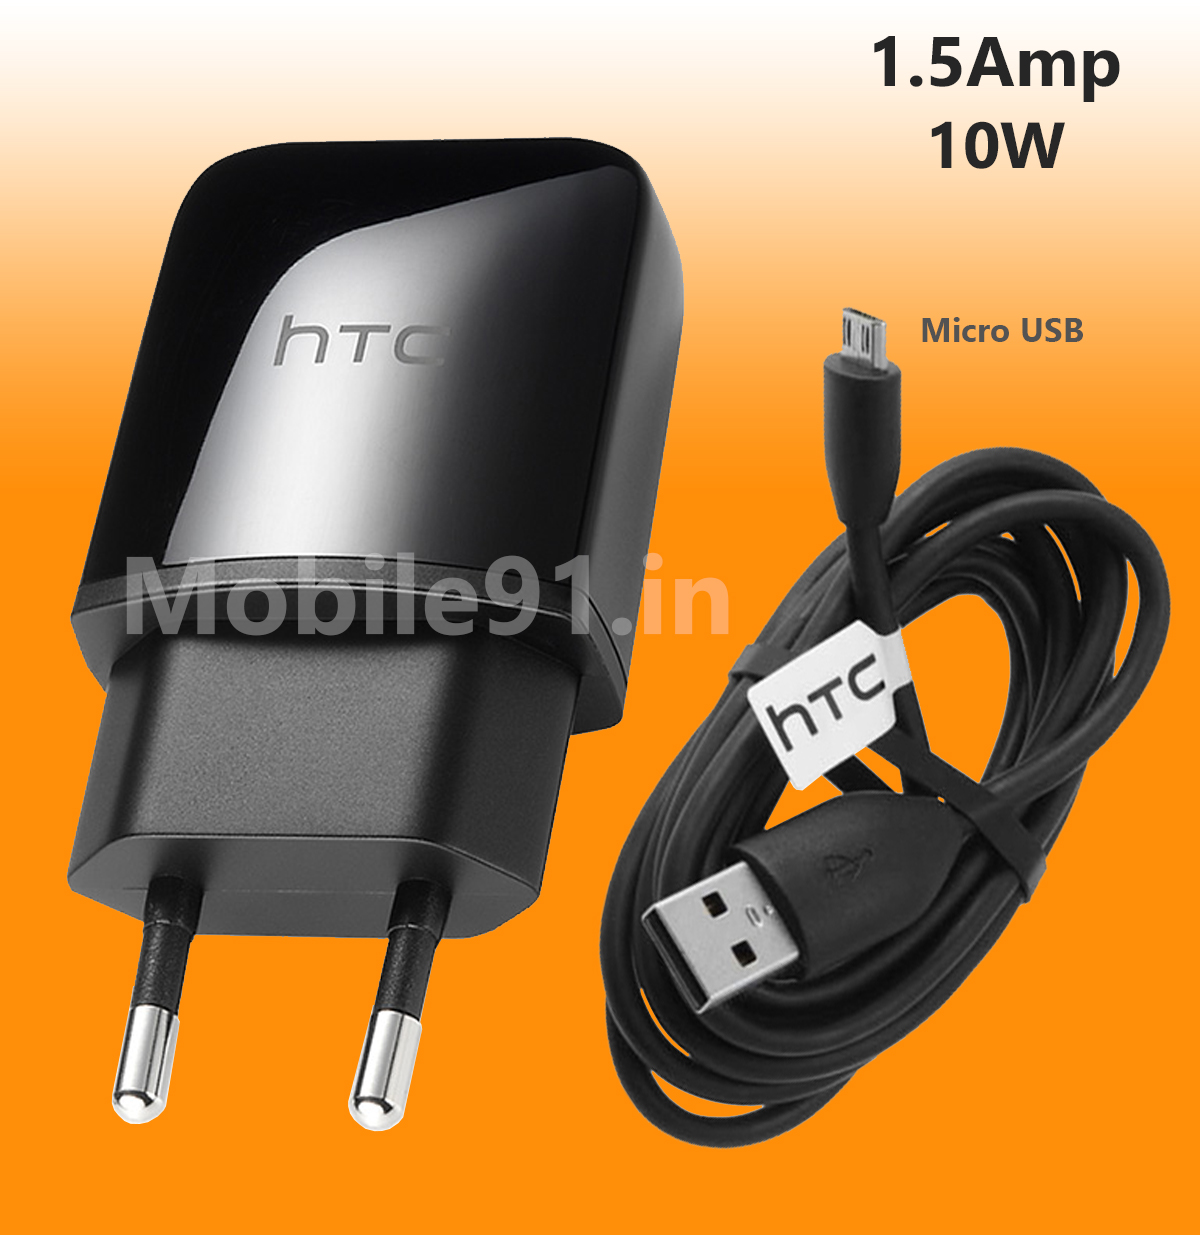 Verbeelding Kolibrie woordenboek HTC 1.5 Amp Charger with Micro USB Cable for HTC Mobile Phone - Mobile 91.in